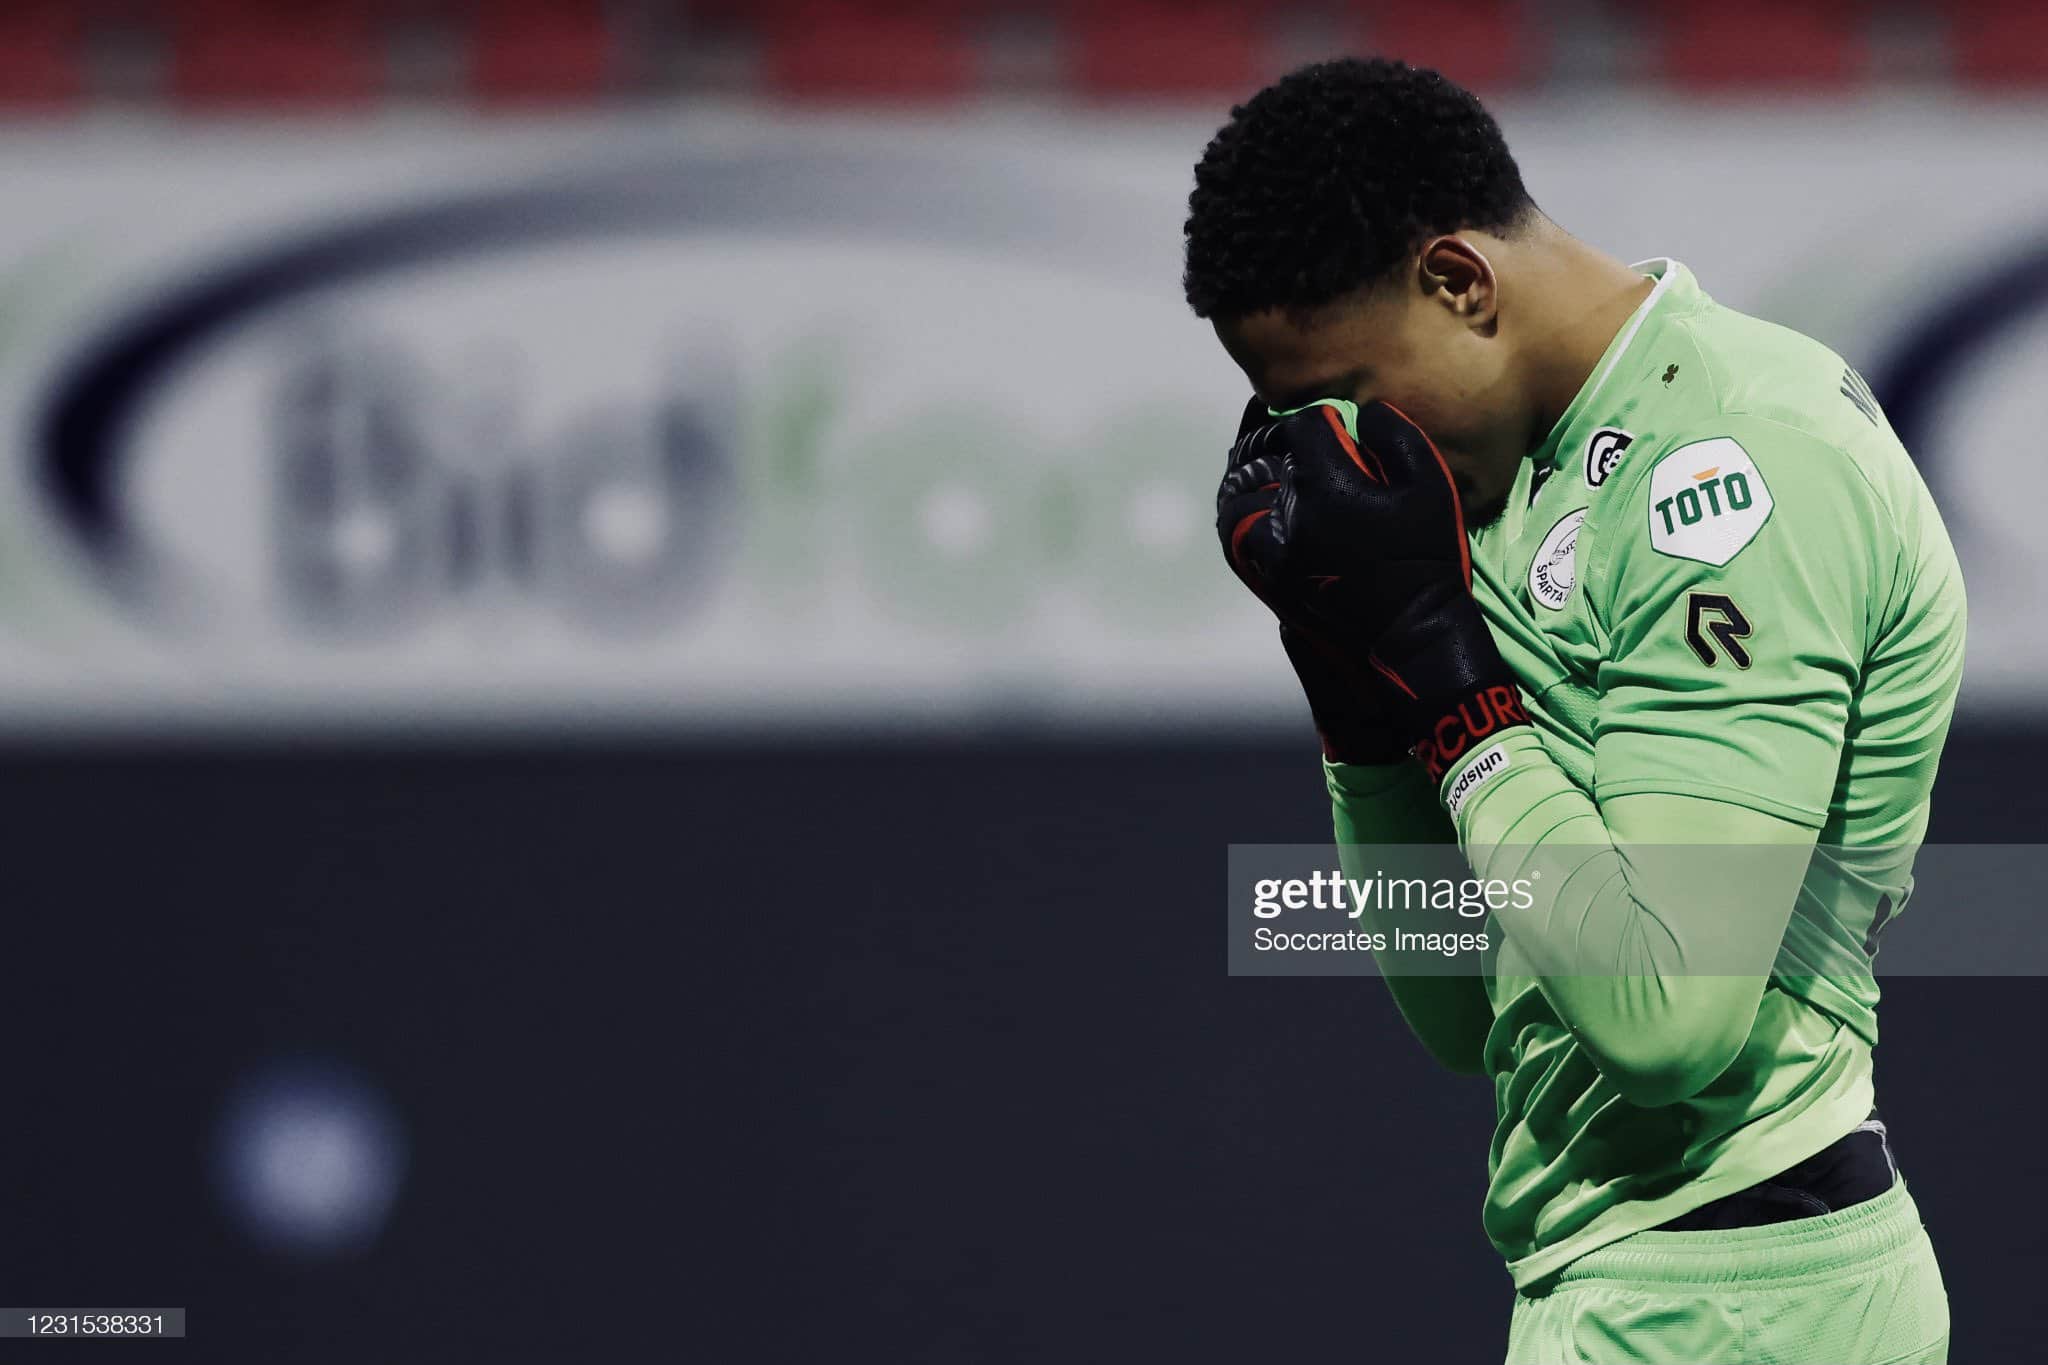 Eredivisie: Okoye Concedes In 7th Consecutive Games As Sparta Rotterdam Lose 4-0 At Home 